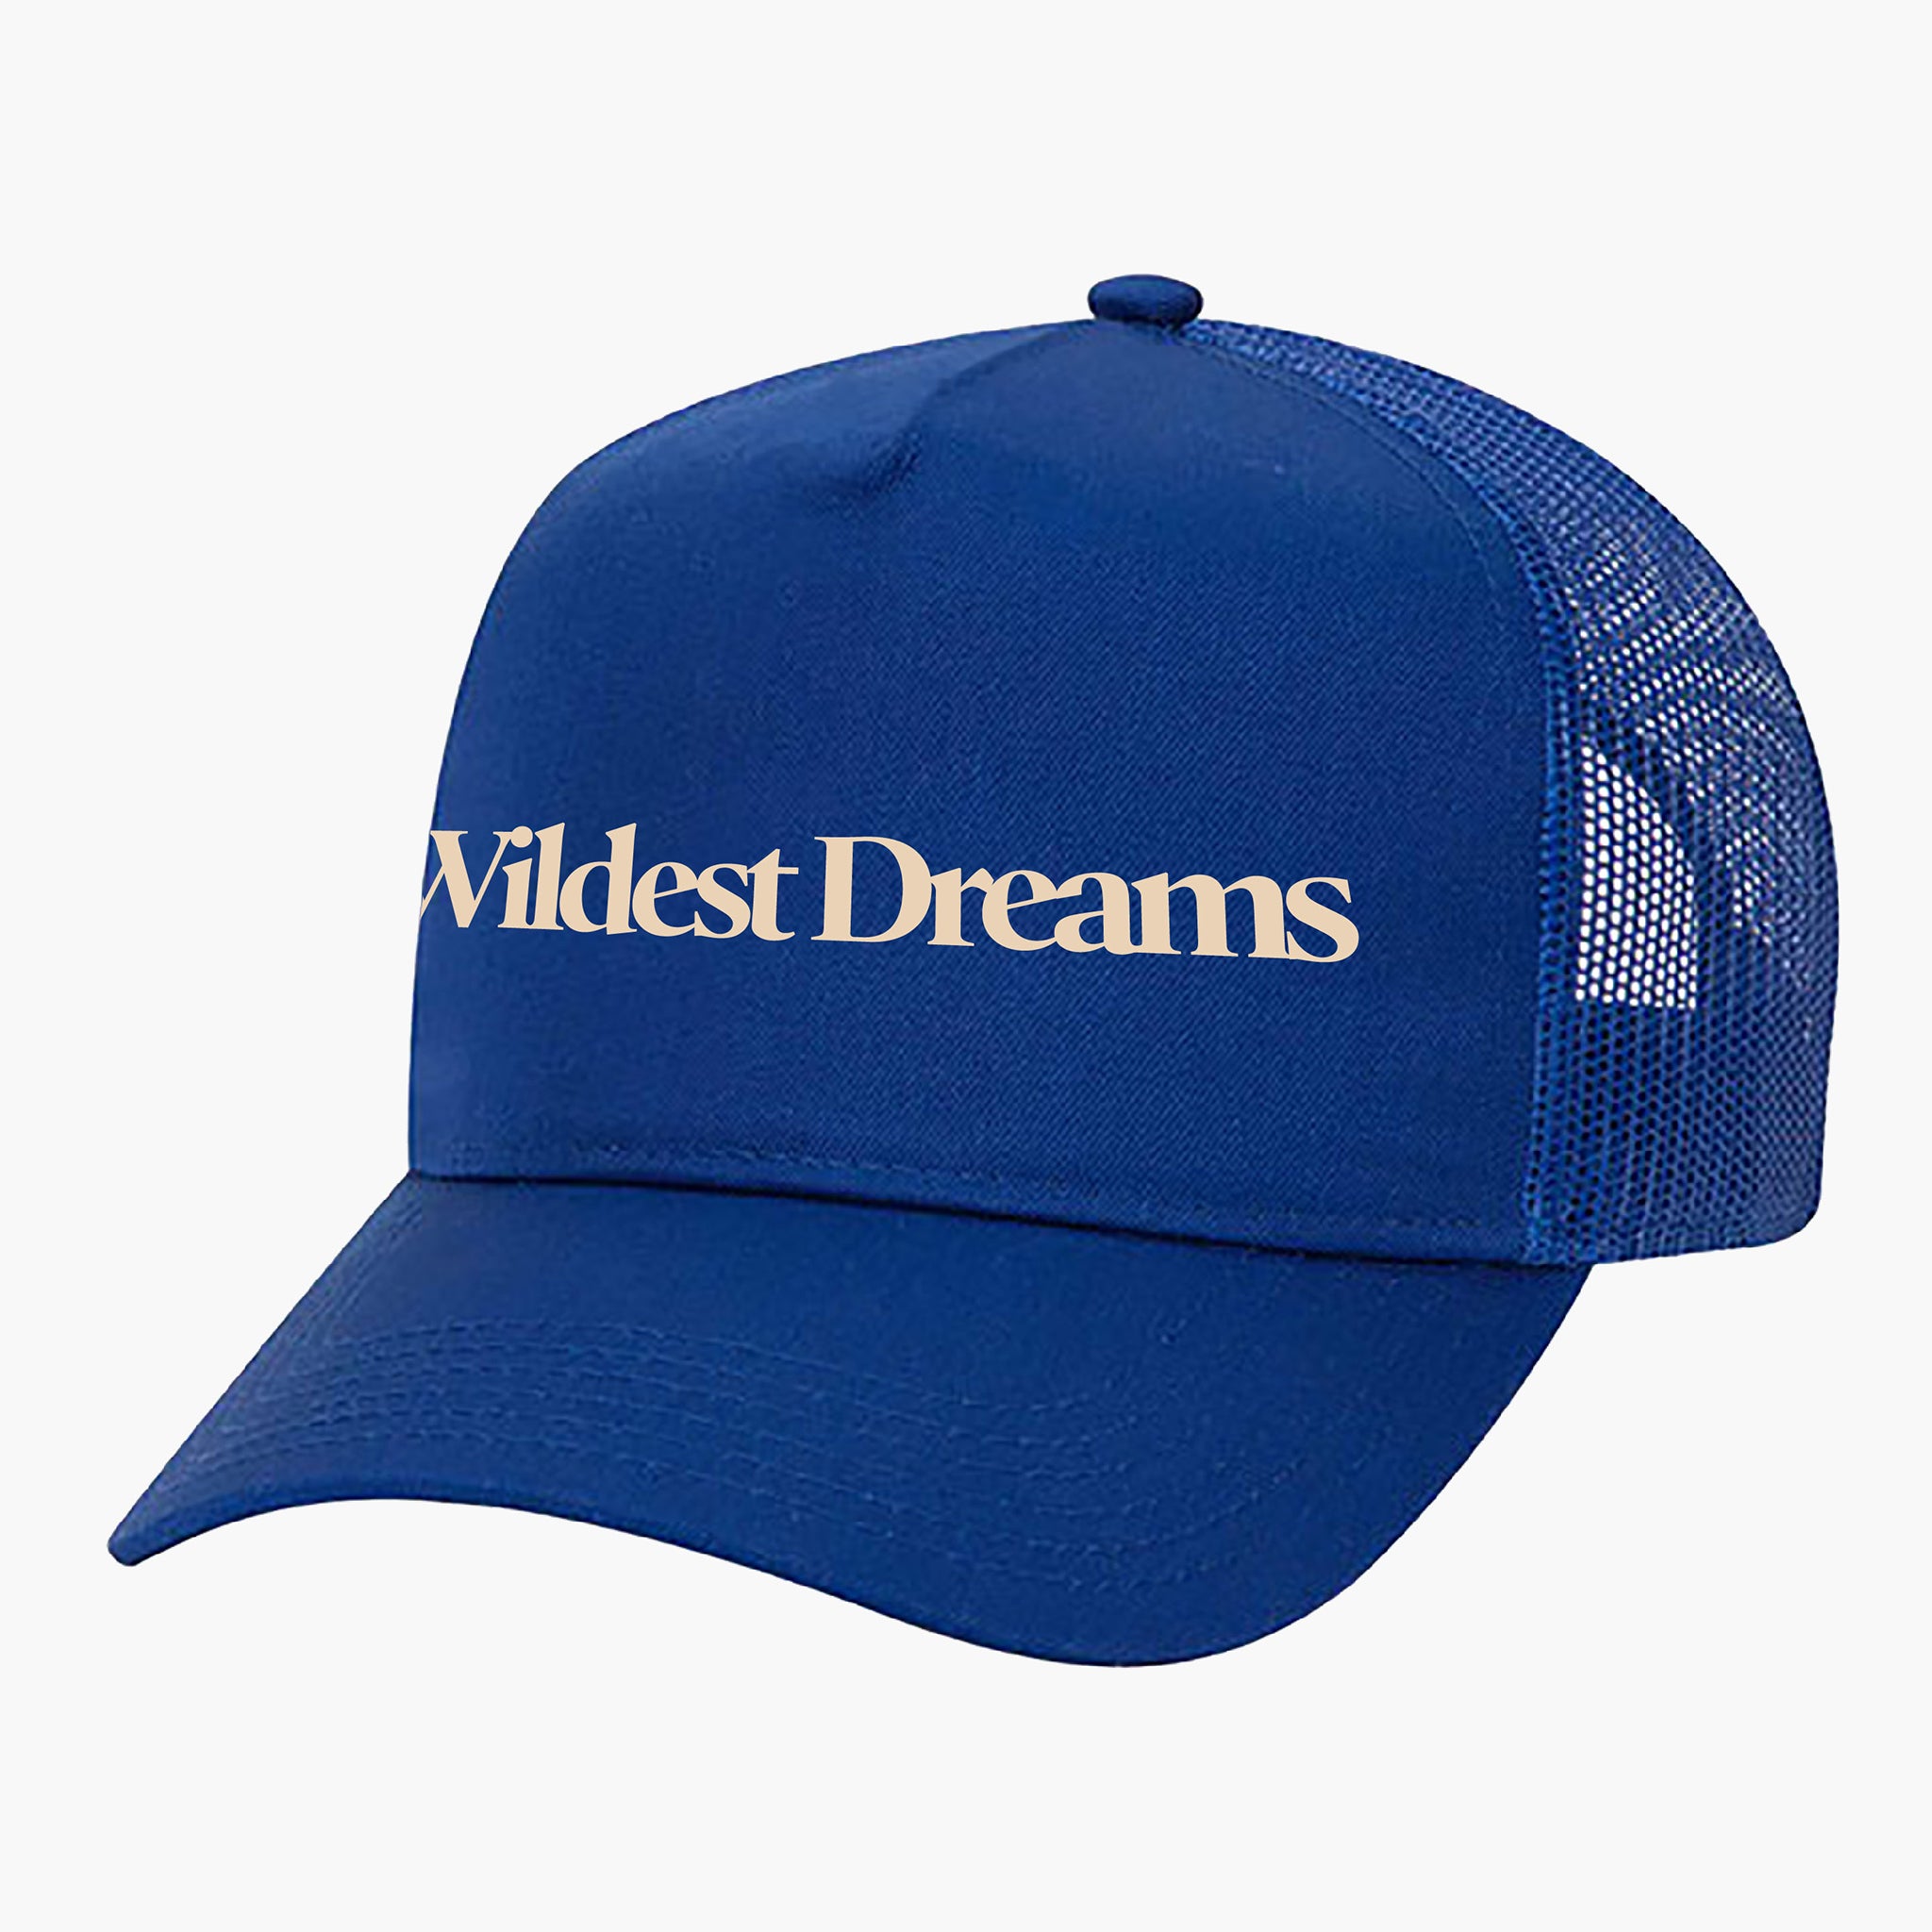 Wildest Dreams Trucker Hat - Frequently Asked Questions